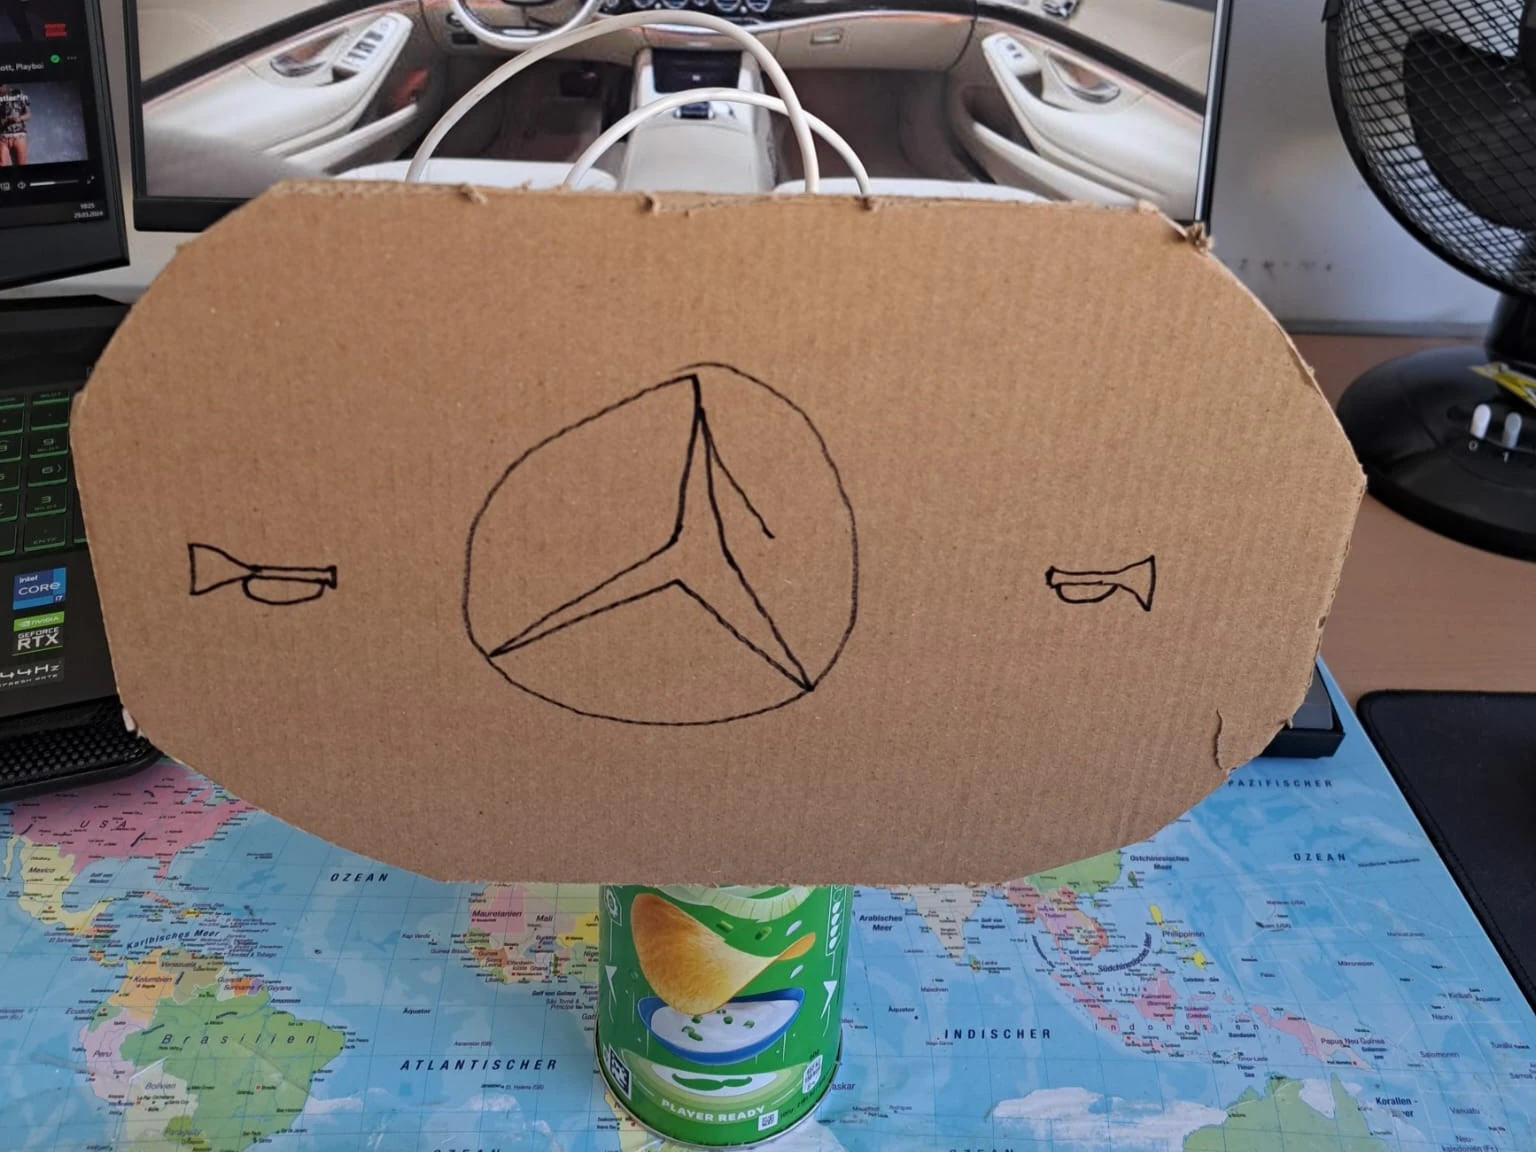 Steering wheel made out of cardboard, on a pringles can